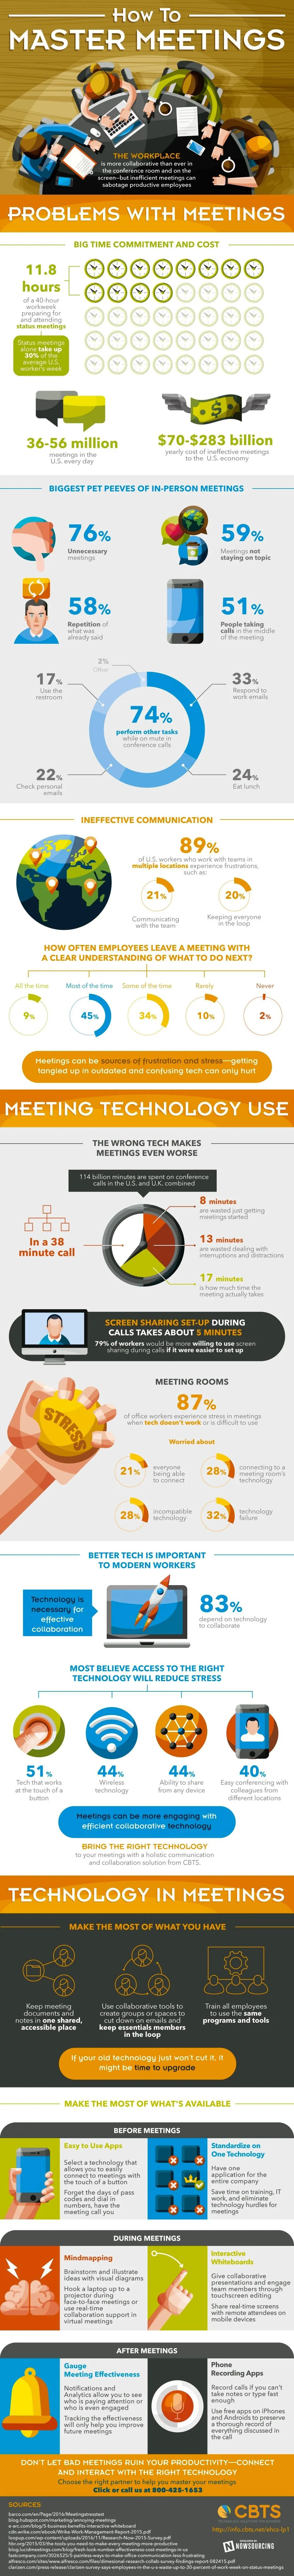 How to Master Meetings - #Infographic